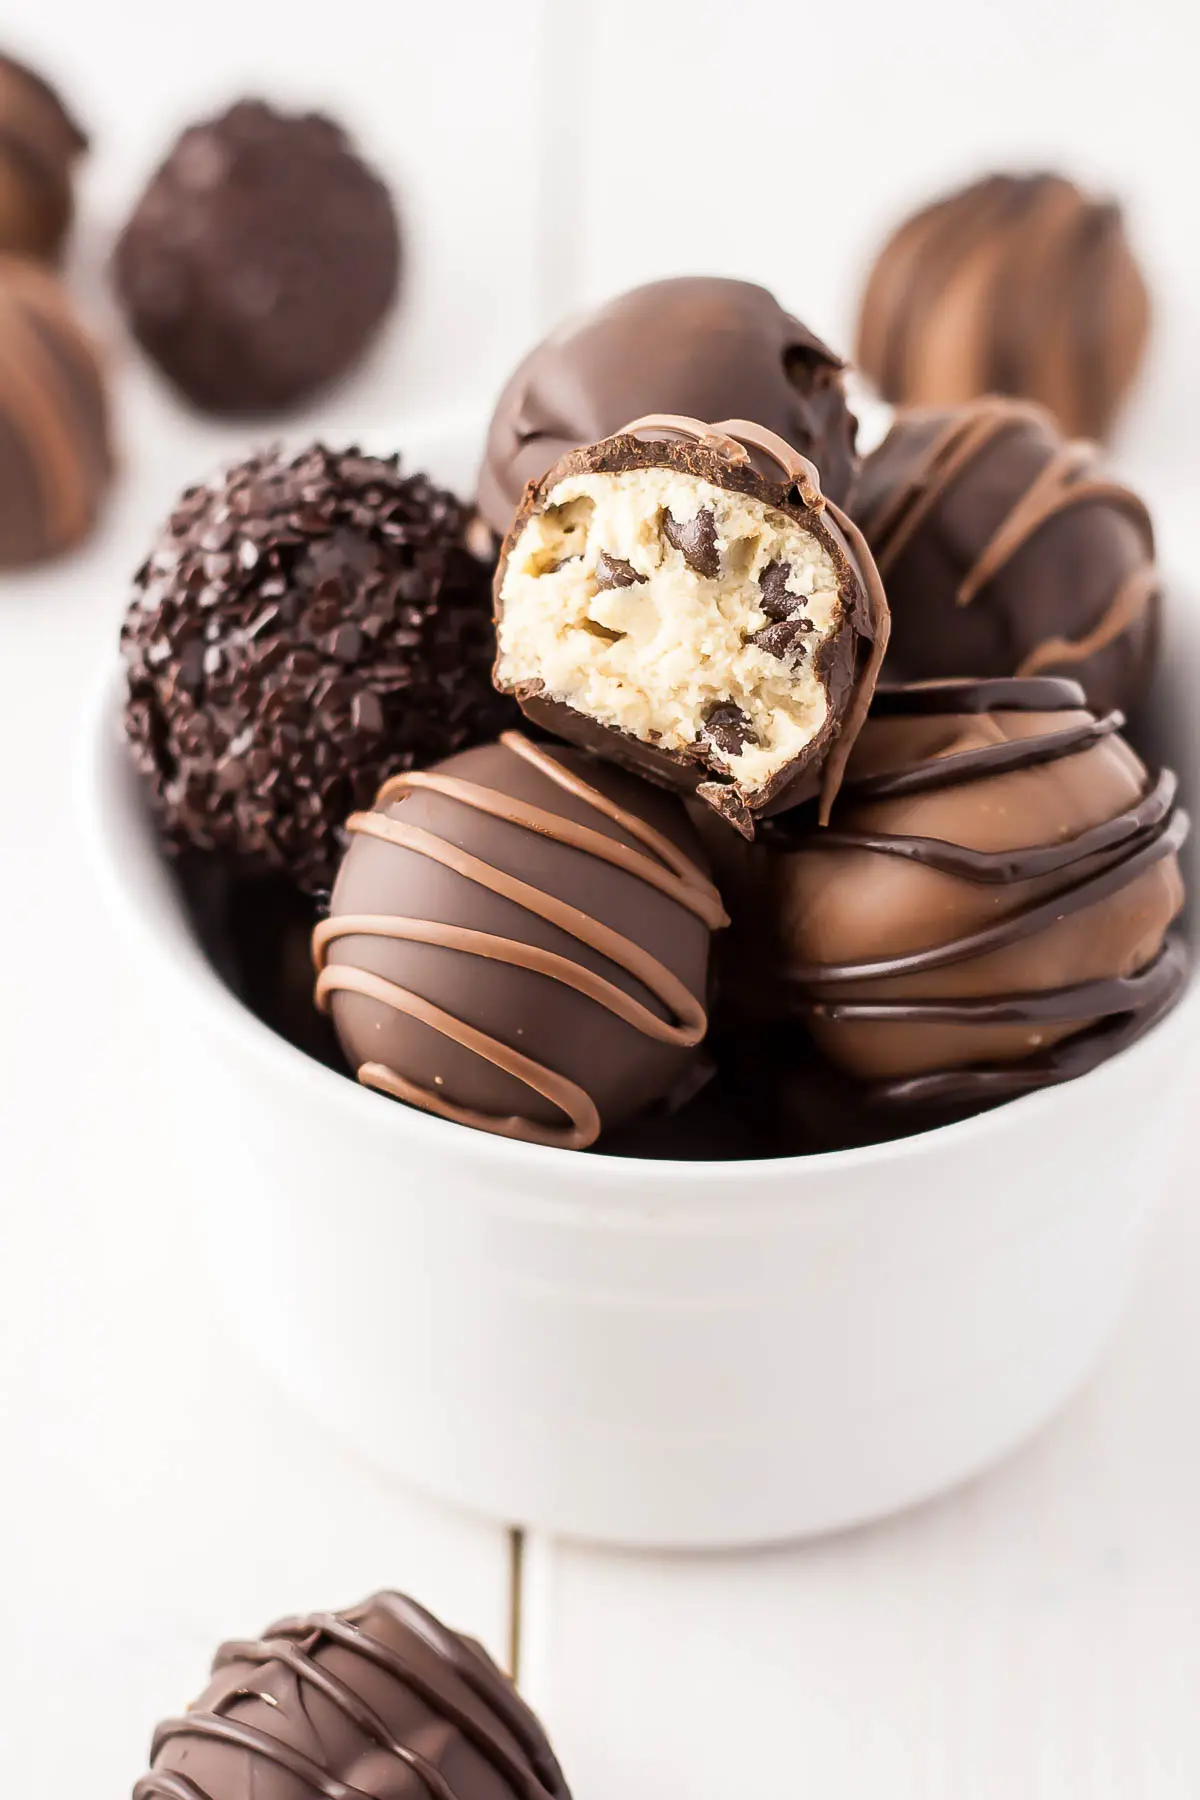 Cookie dough truffles in a bowl. One with a bite taken out.